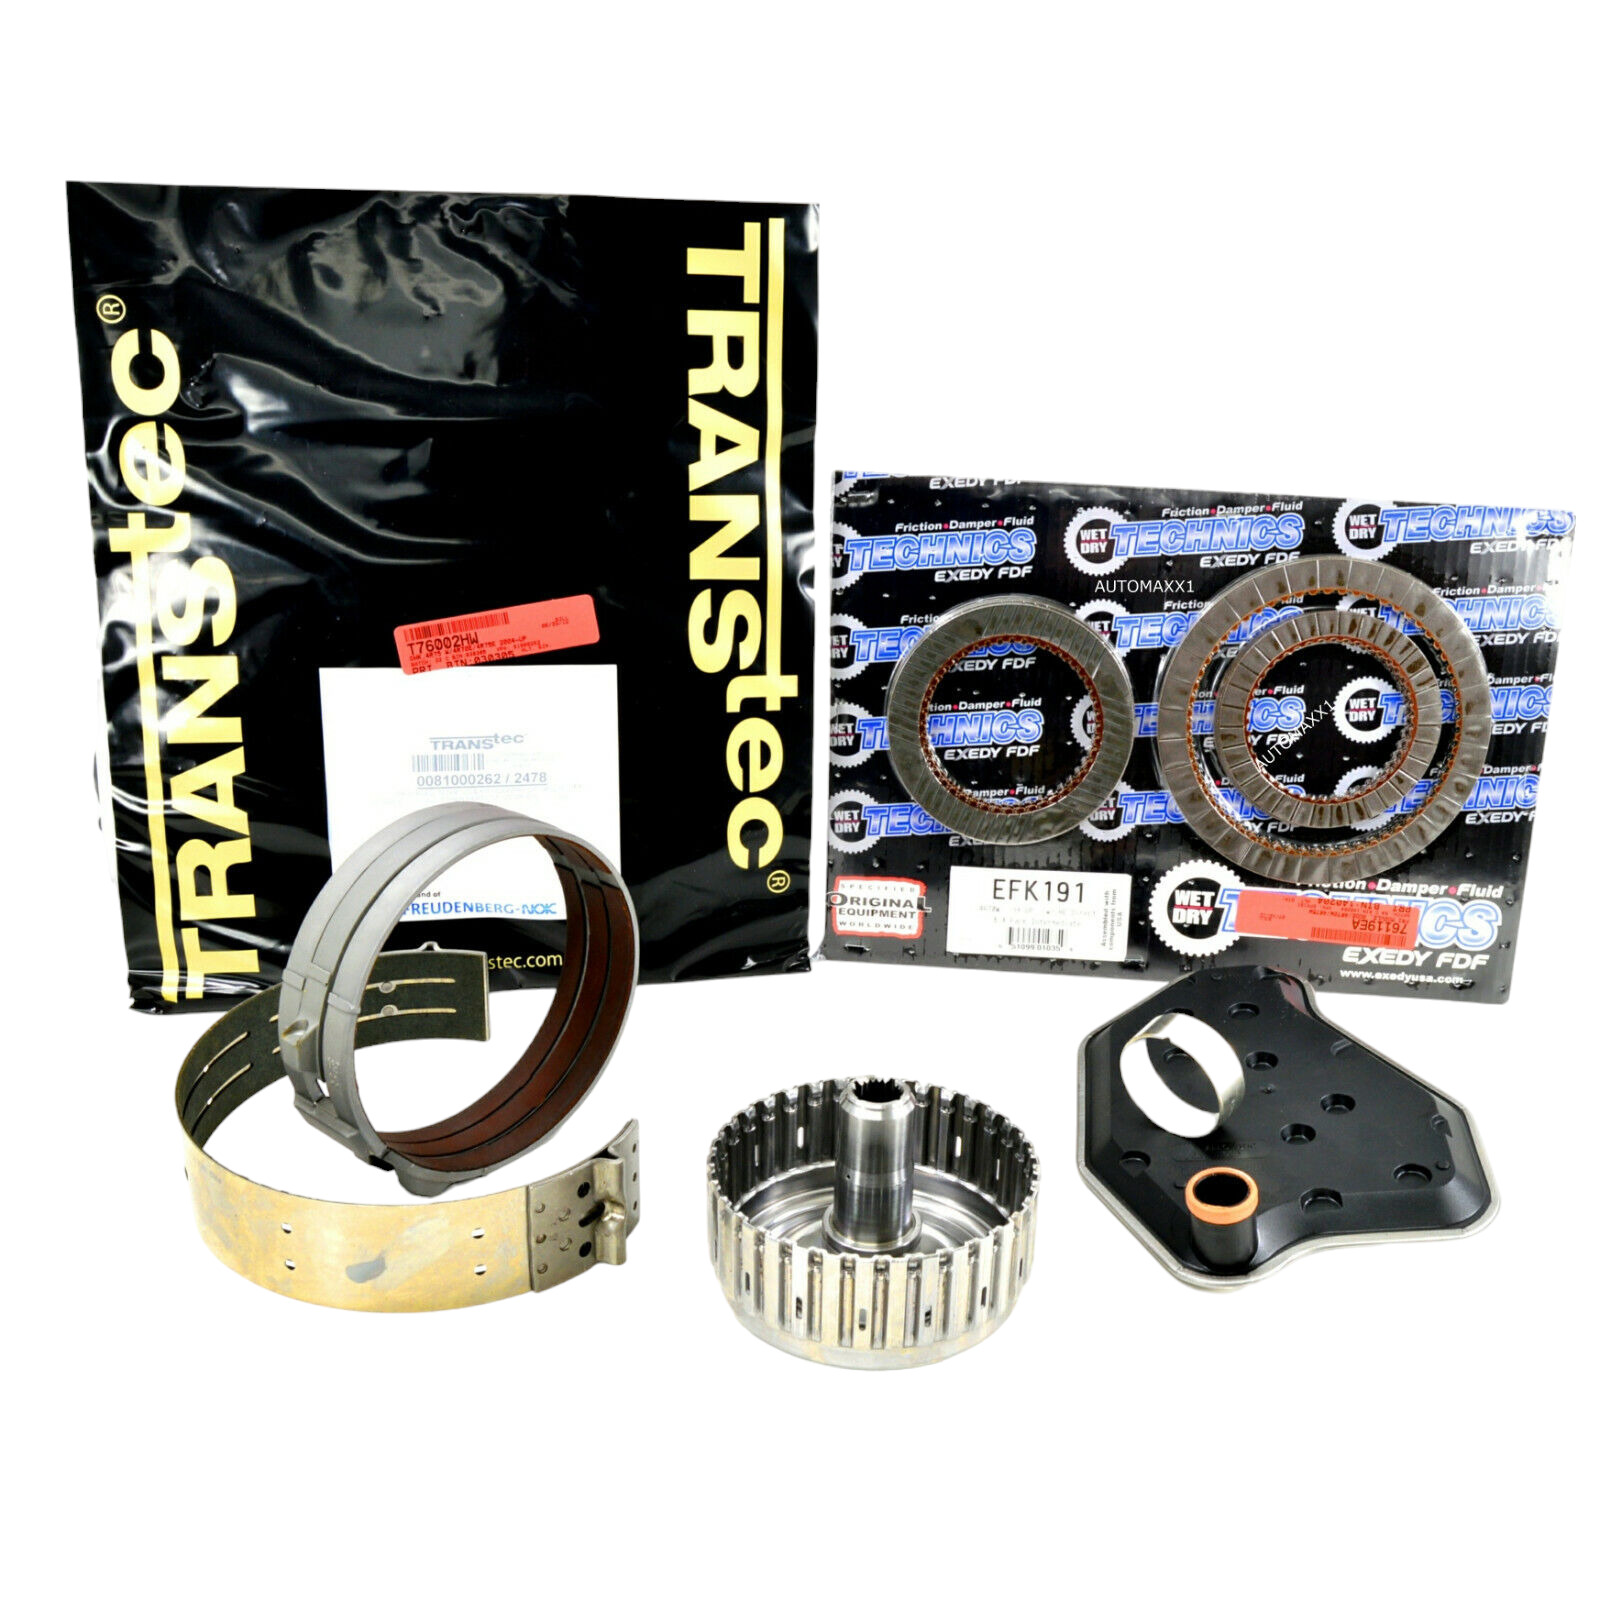 2004+ 4R70W 4R75W TRANSMISSION COMBO REBUILD KIT OEM  WITH BANDS and DIRECT DRUM